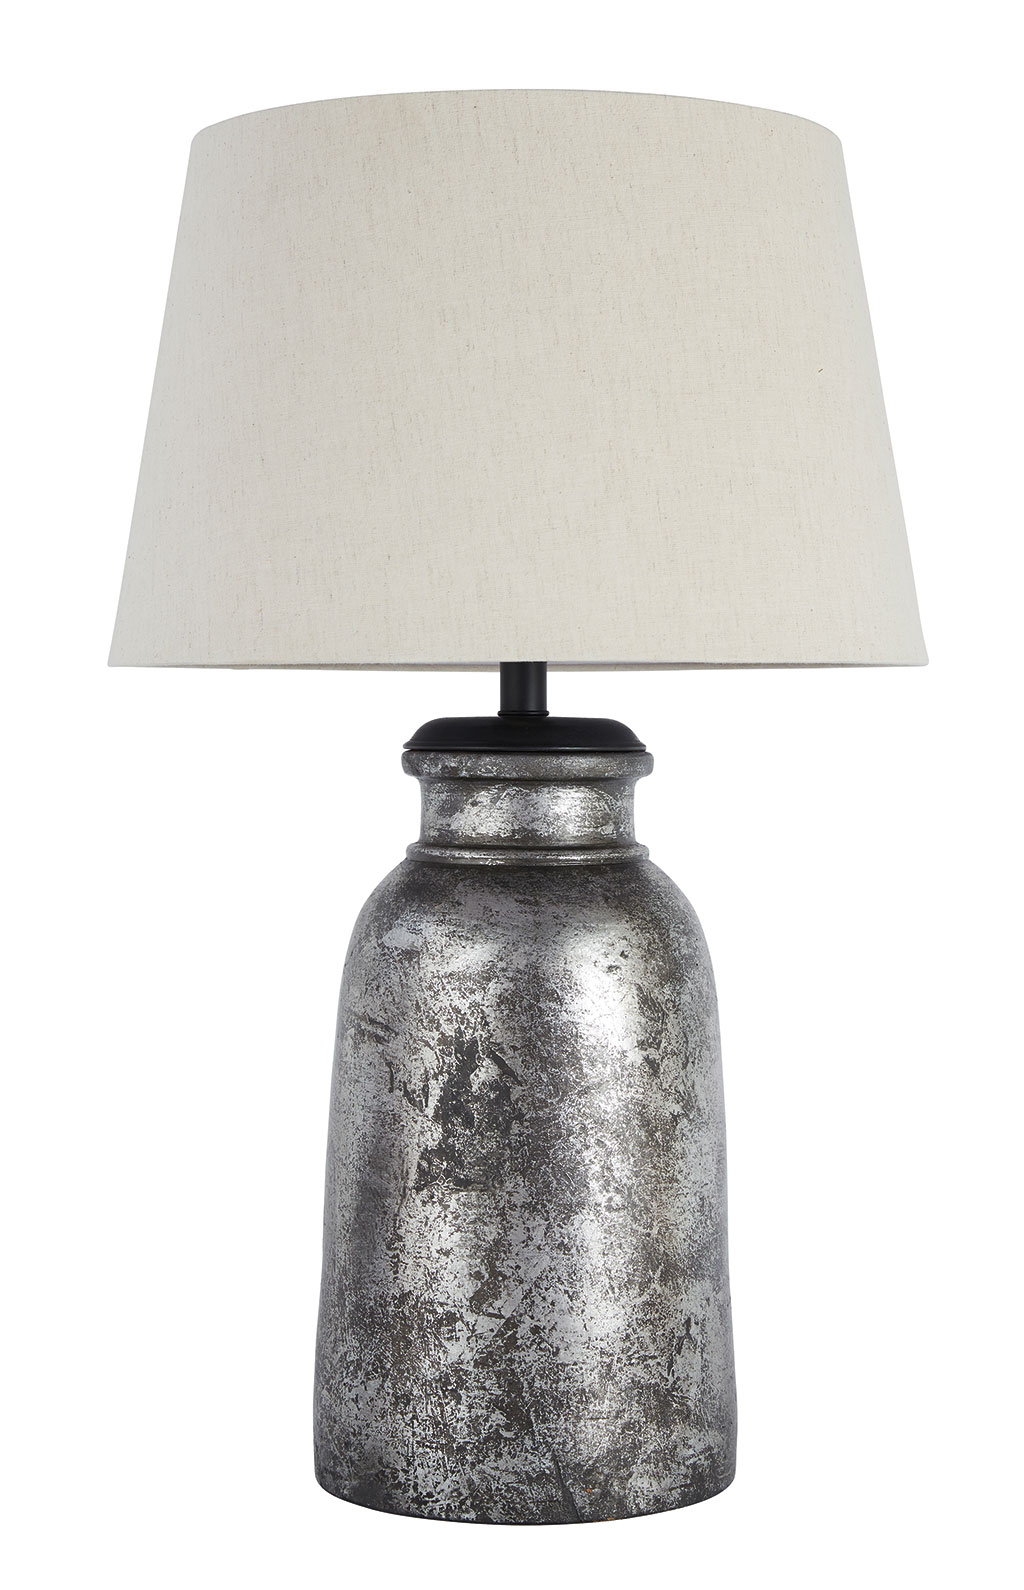 L100274 Table Lamp - Silver Finish